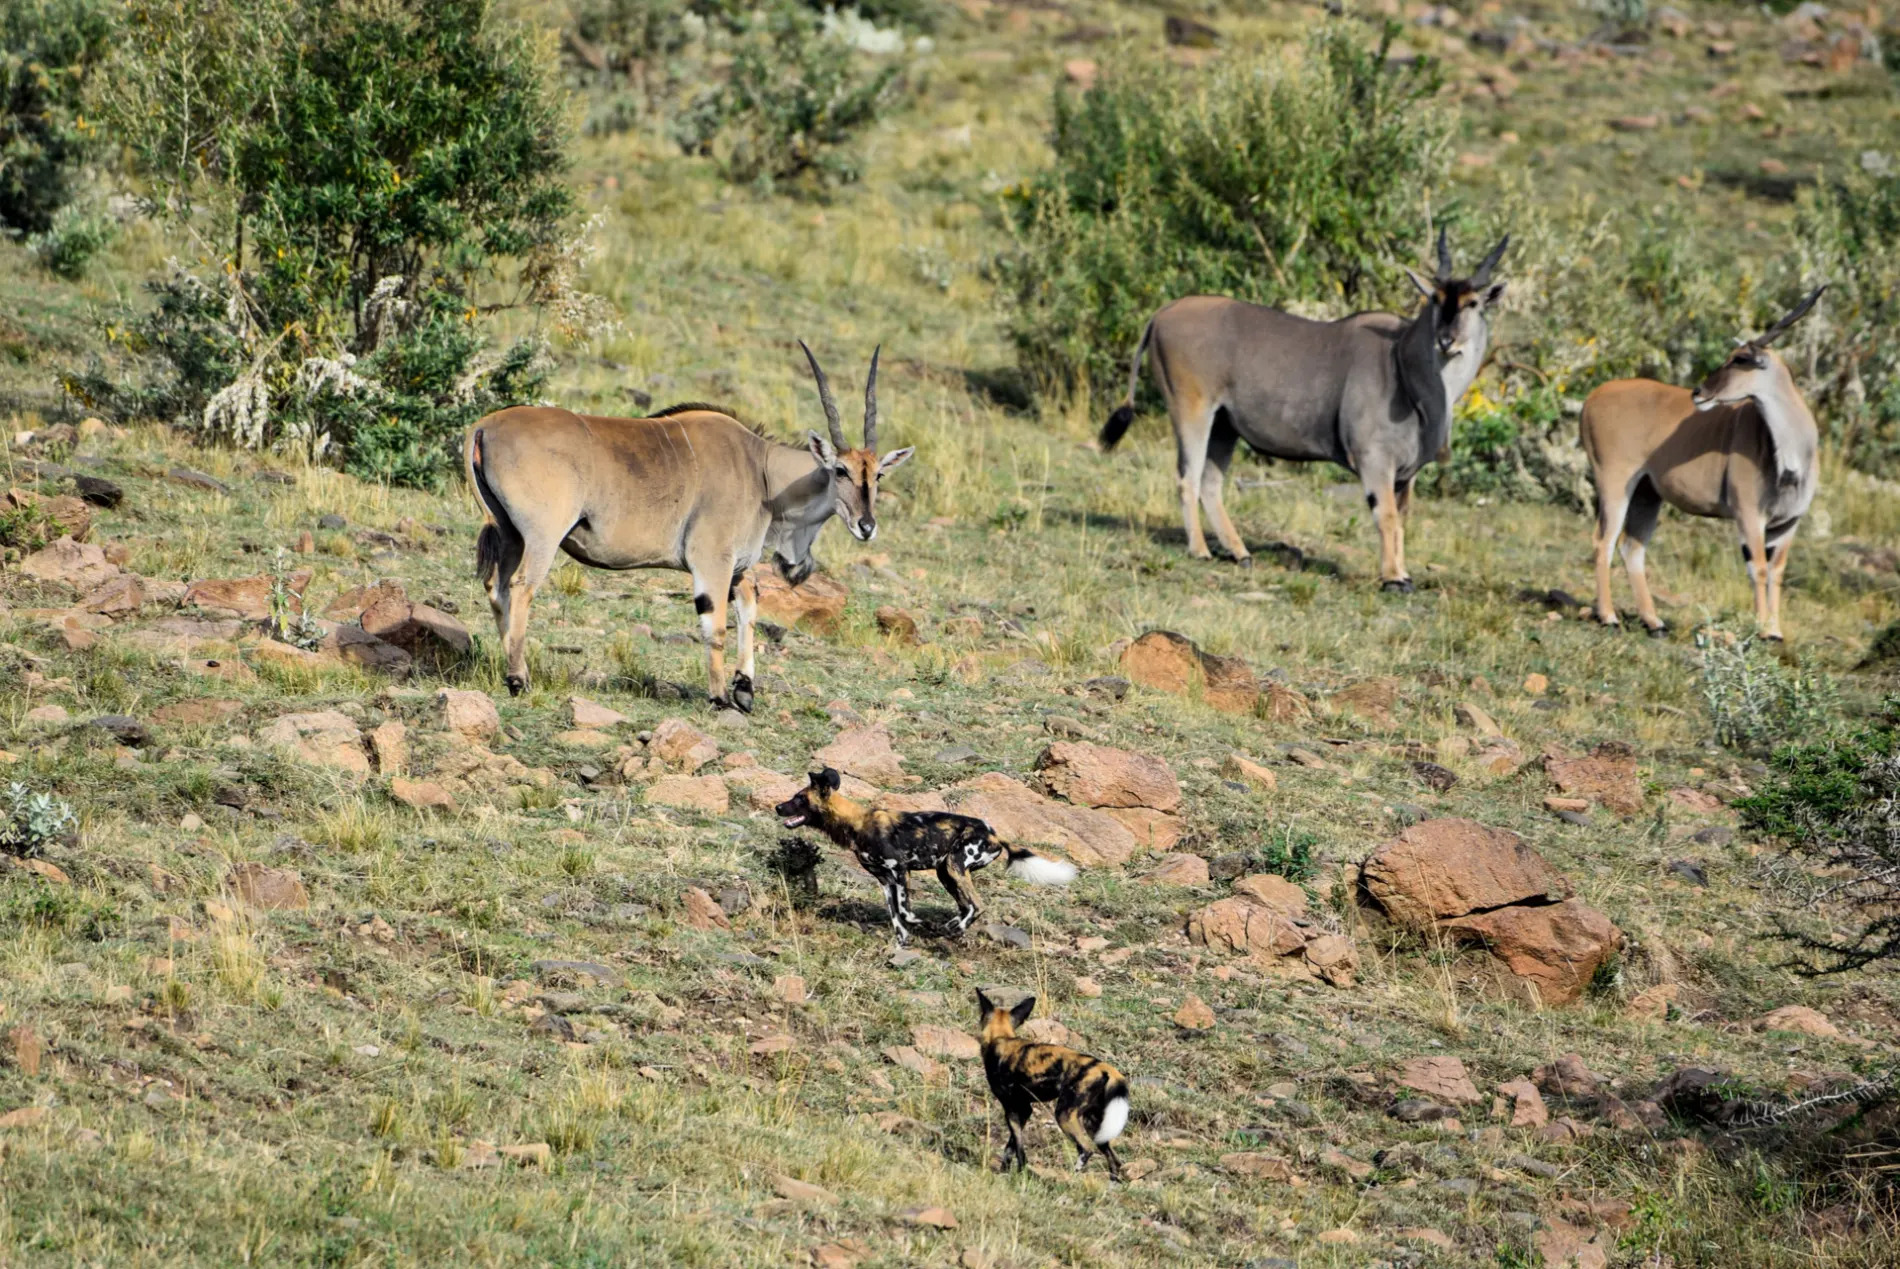 Wild dogs and Eland